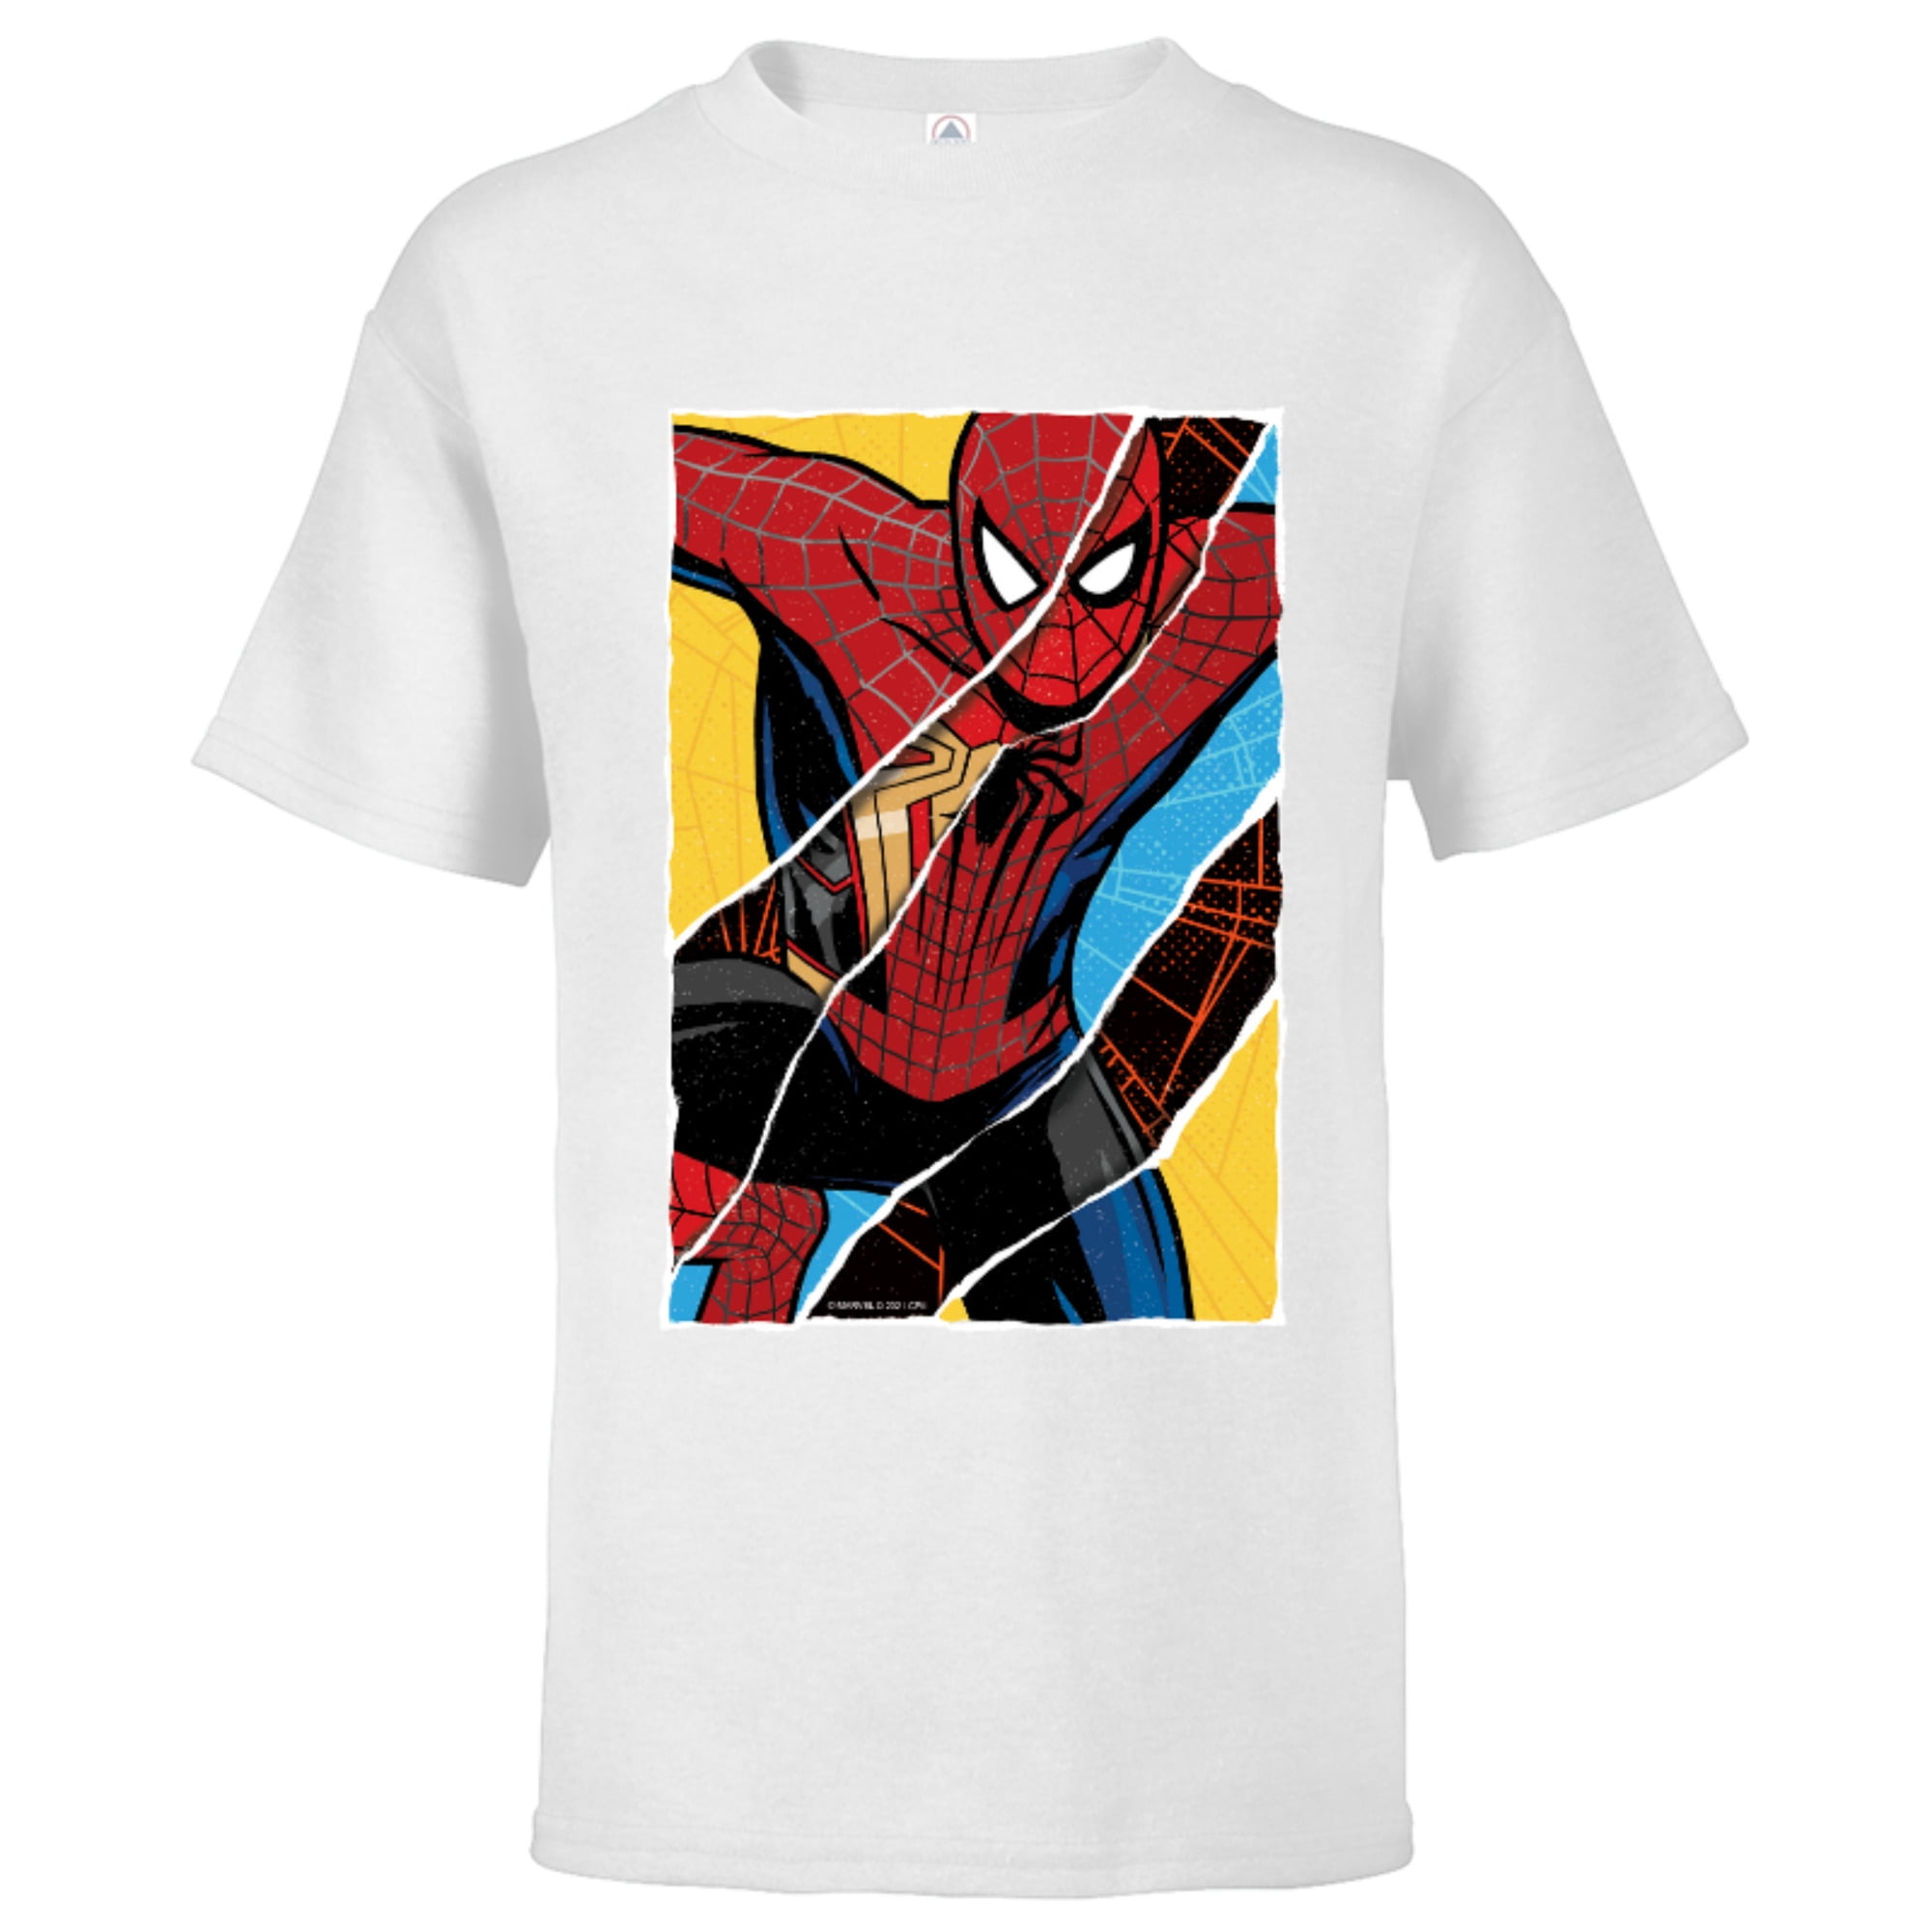 Kids - Short Spider-Men Comic - No Way Marvel Spider-Man: T-Shirt Sleeve Collage Home Customized-Black for